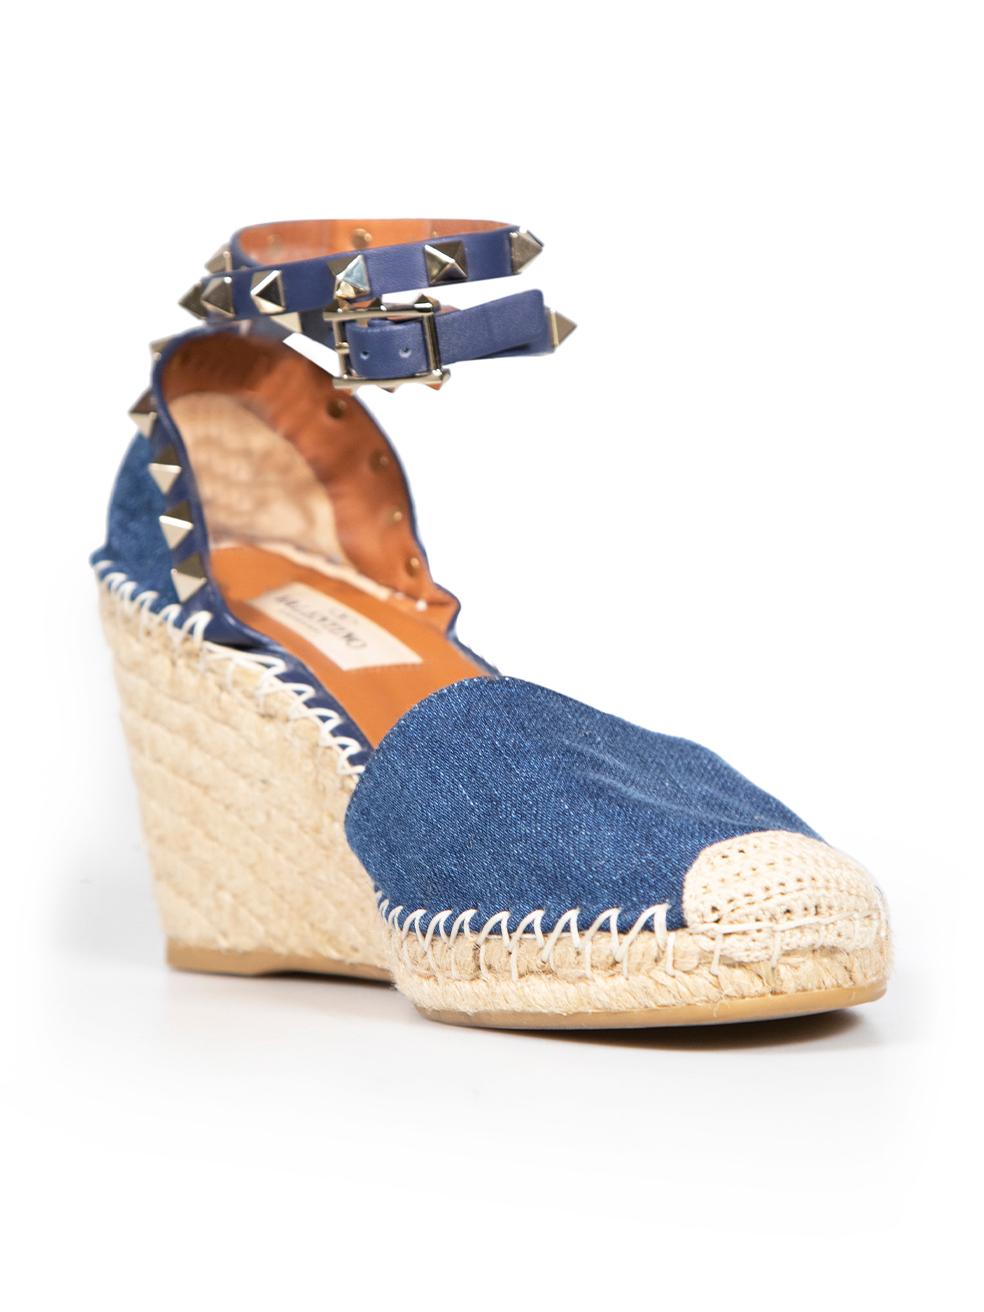 CONDITION is Very good. Minimal wear to wedges is evident. Minimal wear to soles on this used Valentino designer resale item. These shoes come with original dust bag.
 
 
 
 Details
 
 
 Blue
 
 Denim
 
 Wedge espadrilles
 
 Rockstud accent
 
 Round